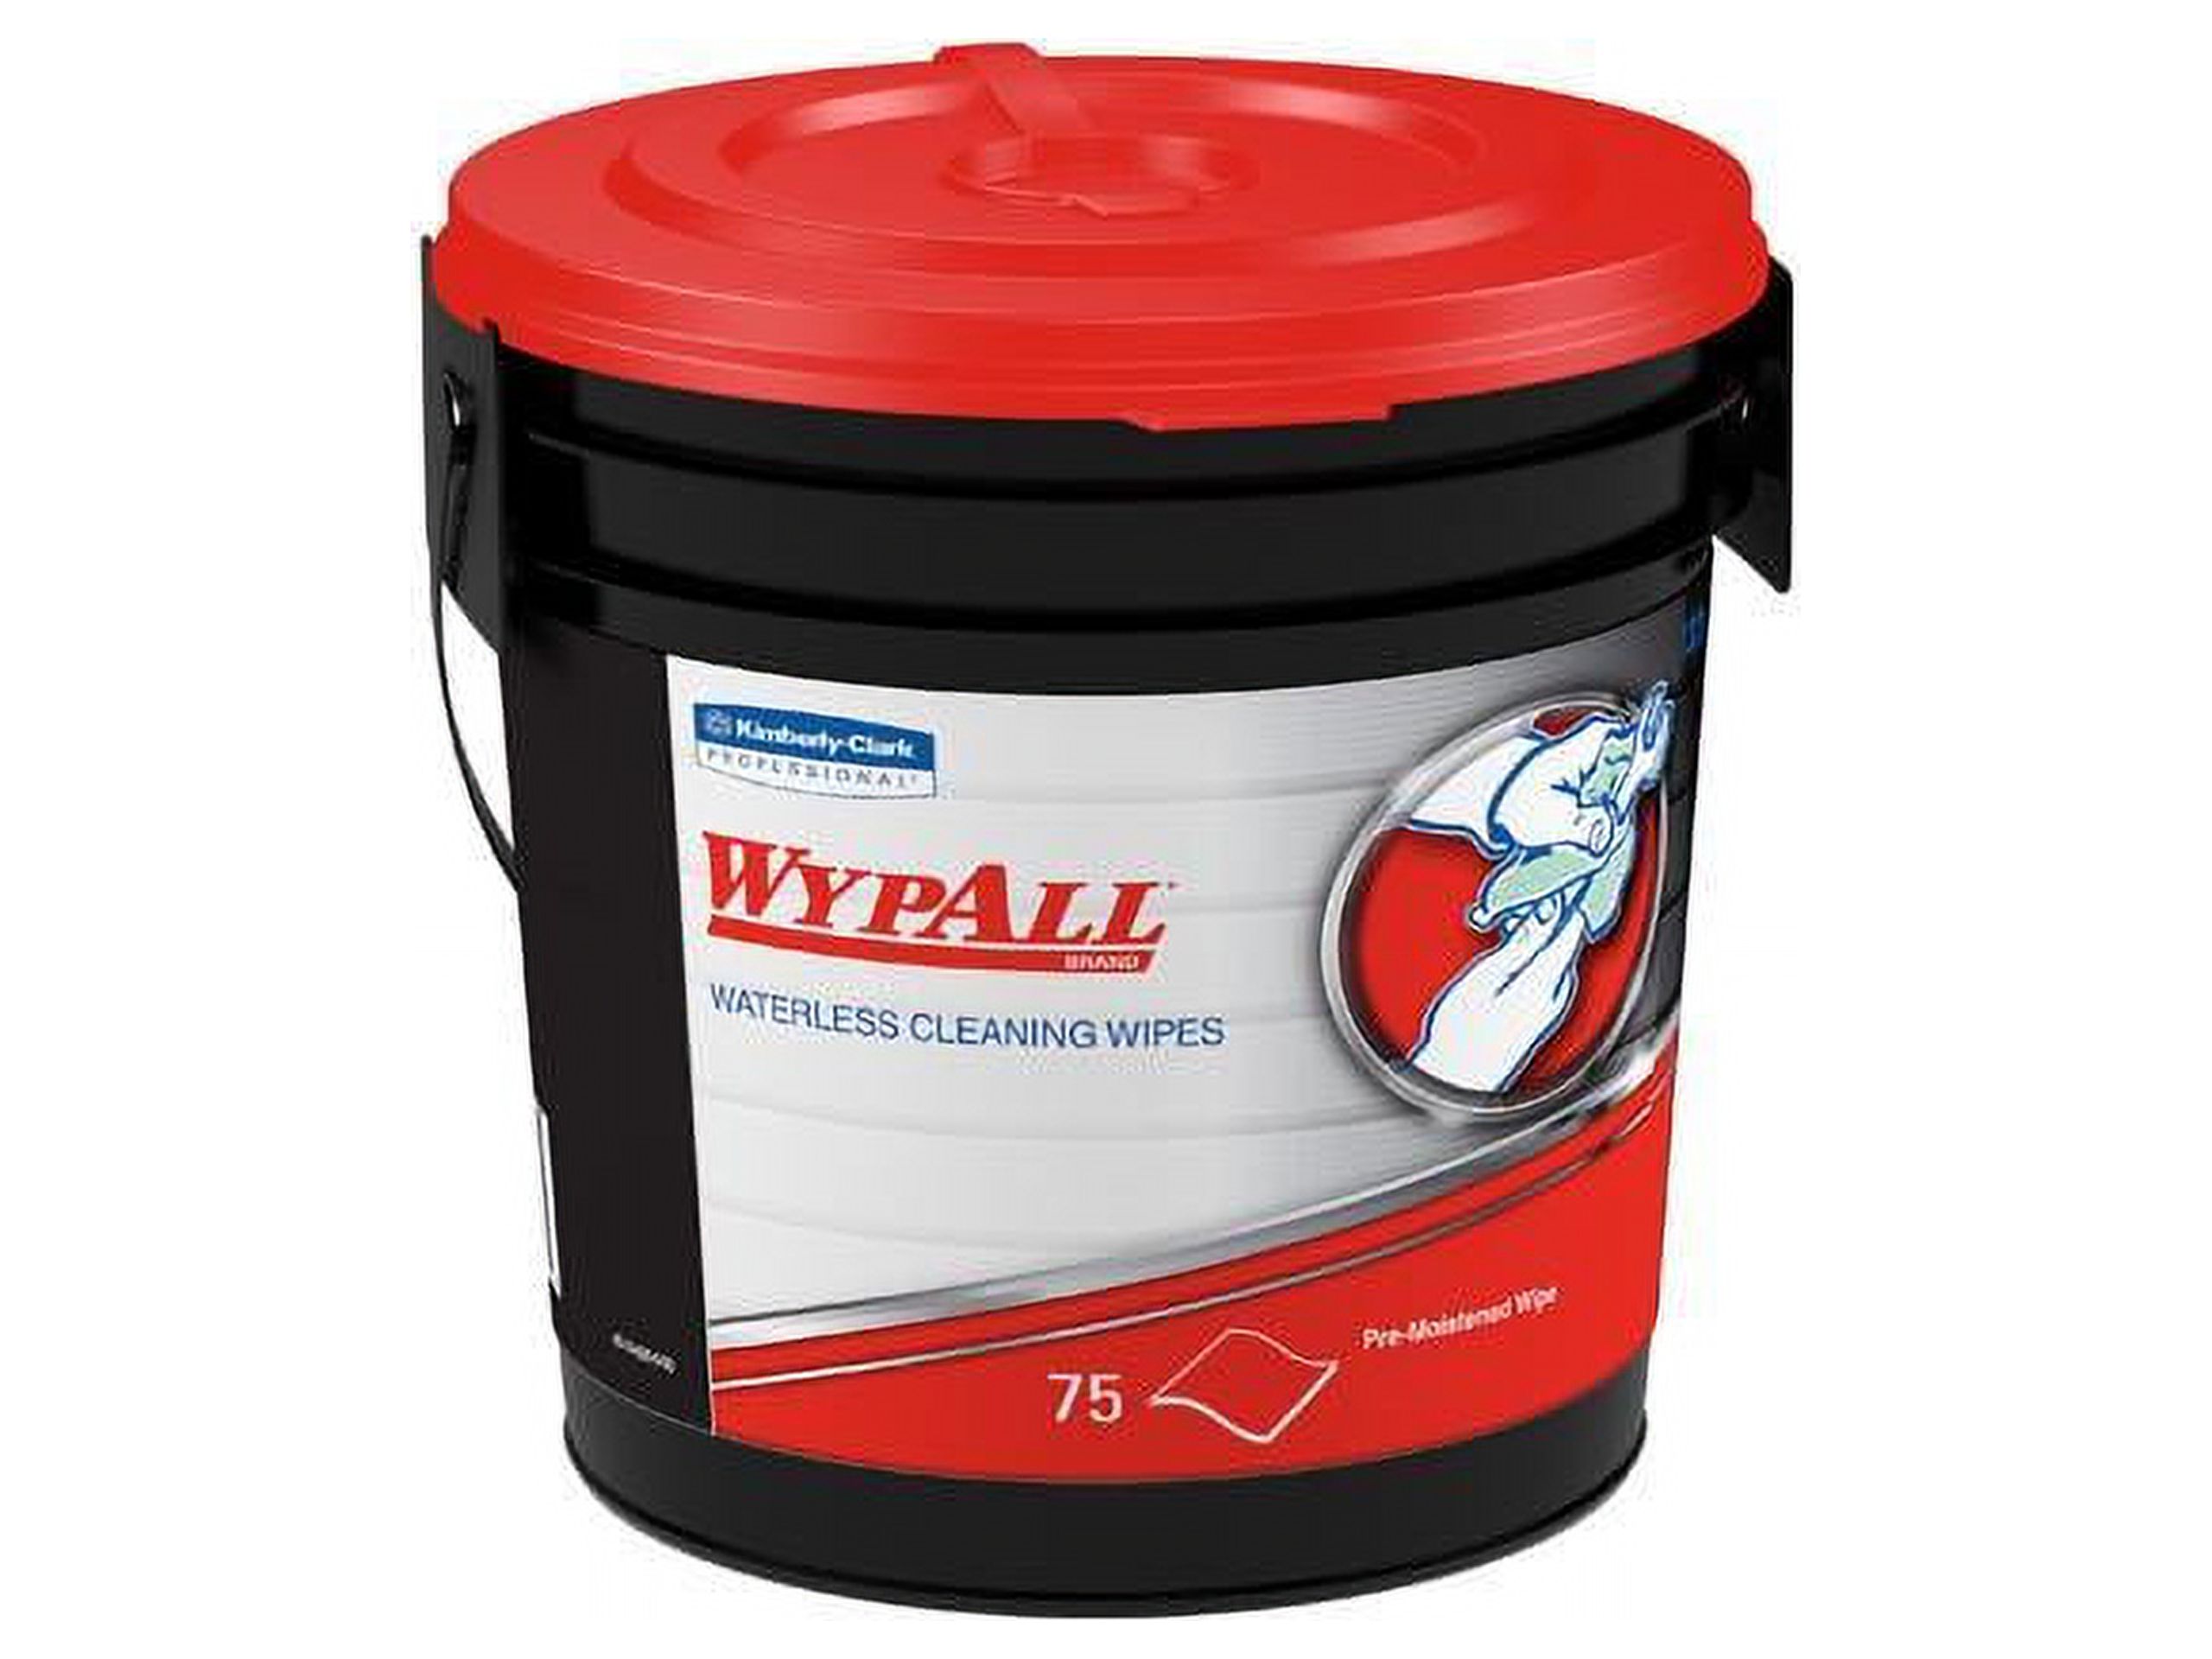 Wypall, KCC91371, Waterless Cleaning Wipes - image 2 of 4